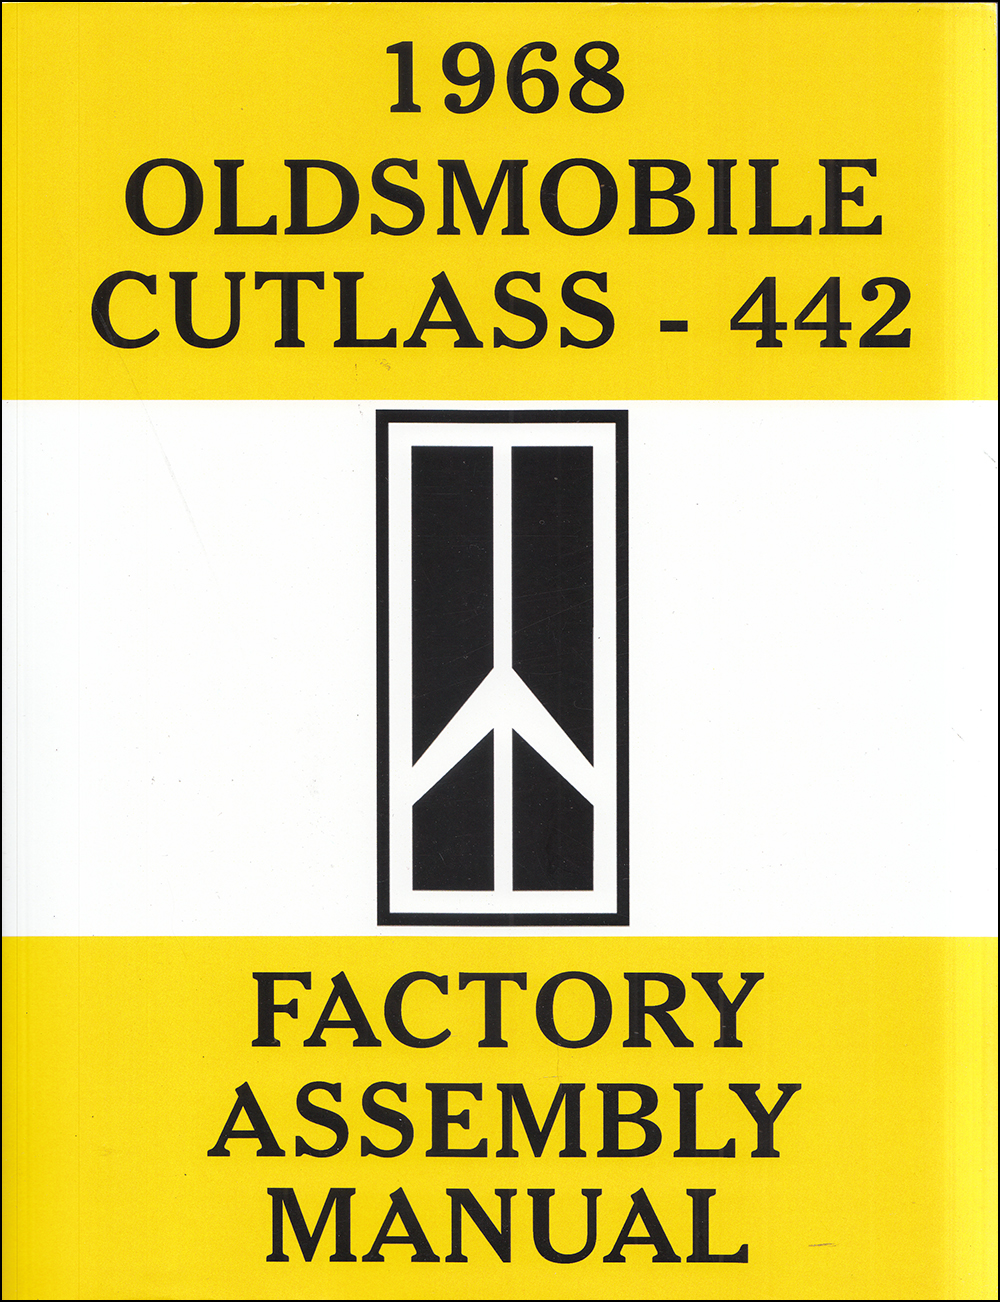 1968 Oldsmobile Assembly Manual Reprint Bound 442 Cutlass, S, Supreme